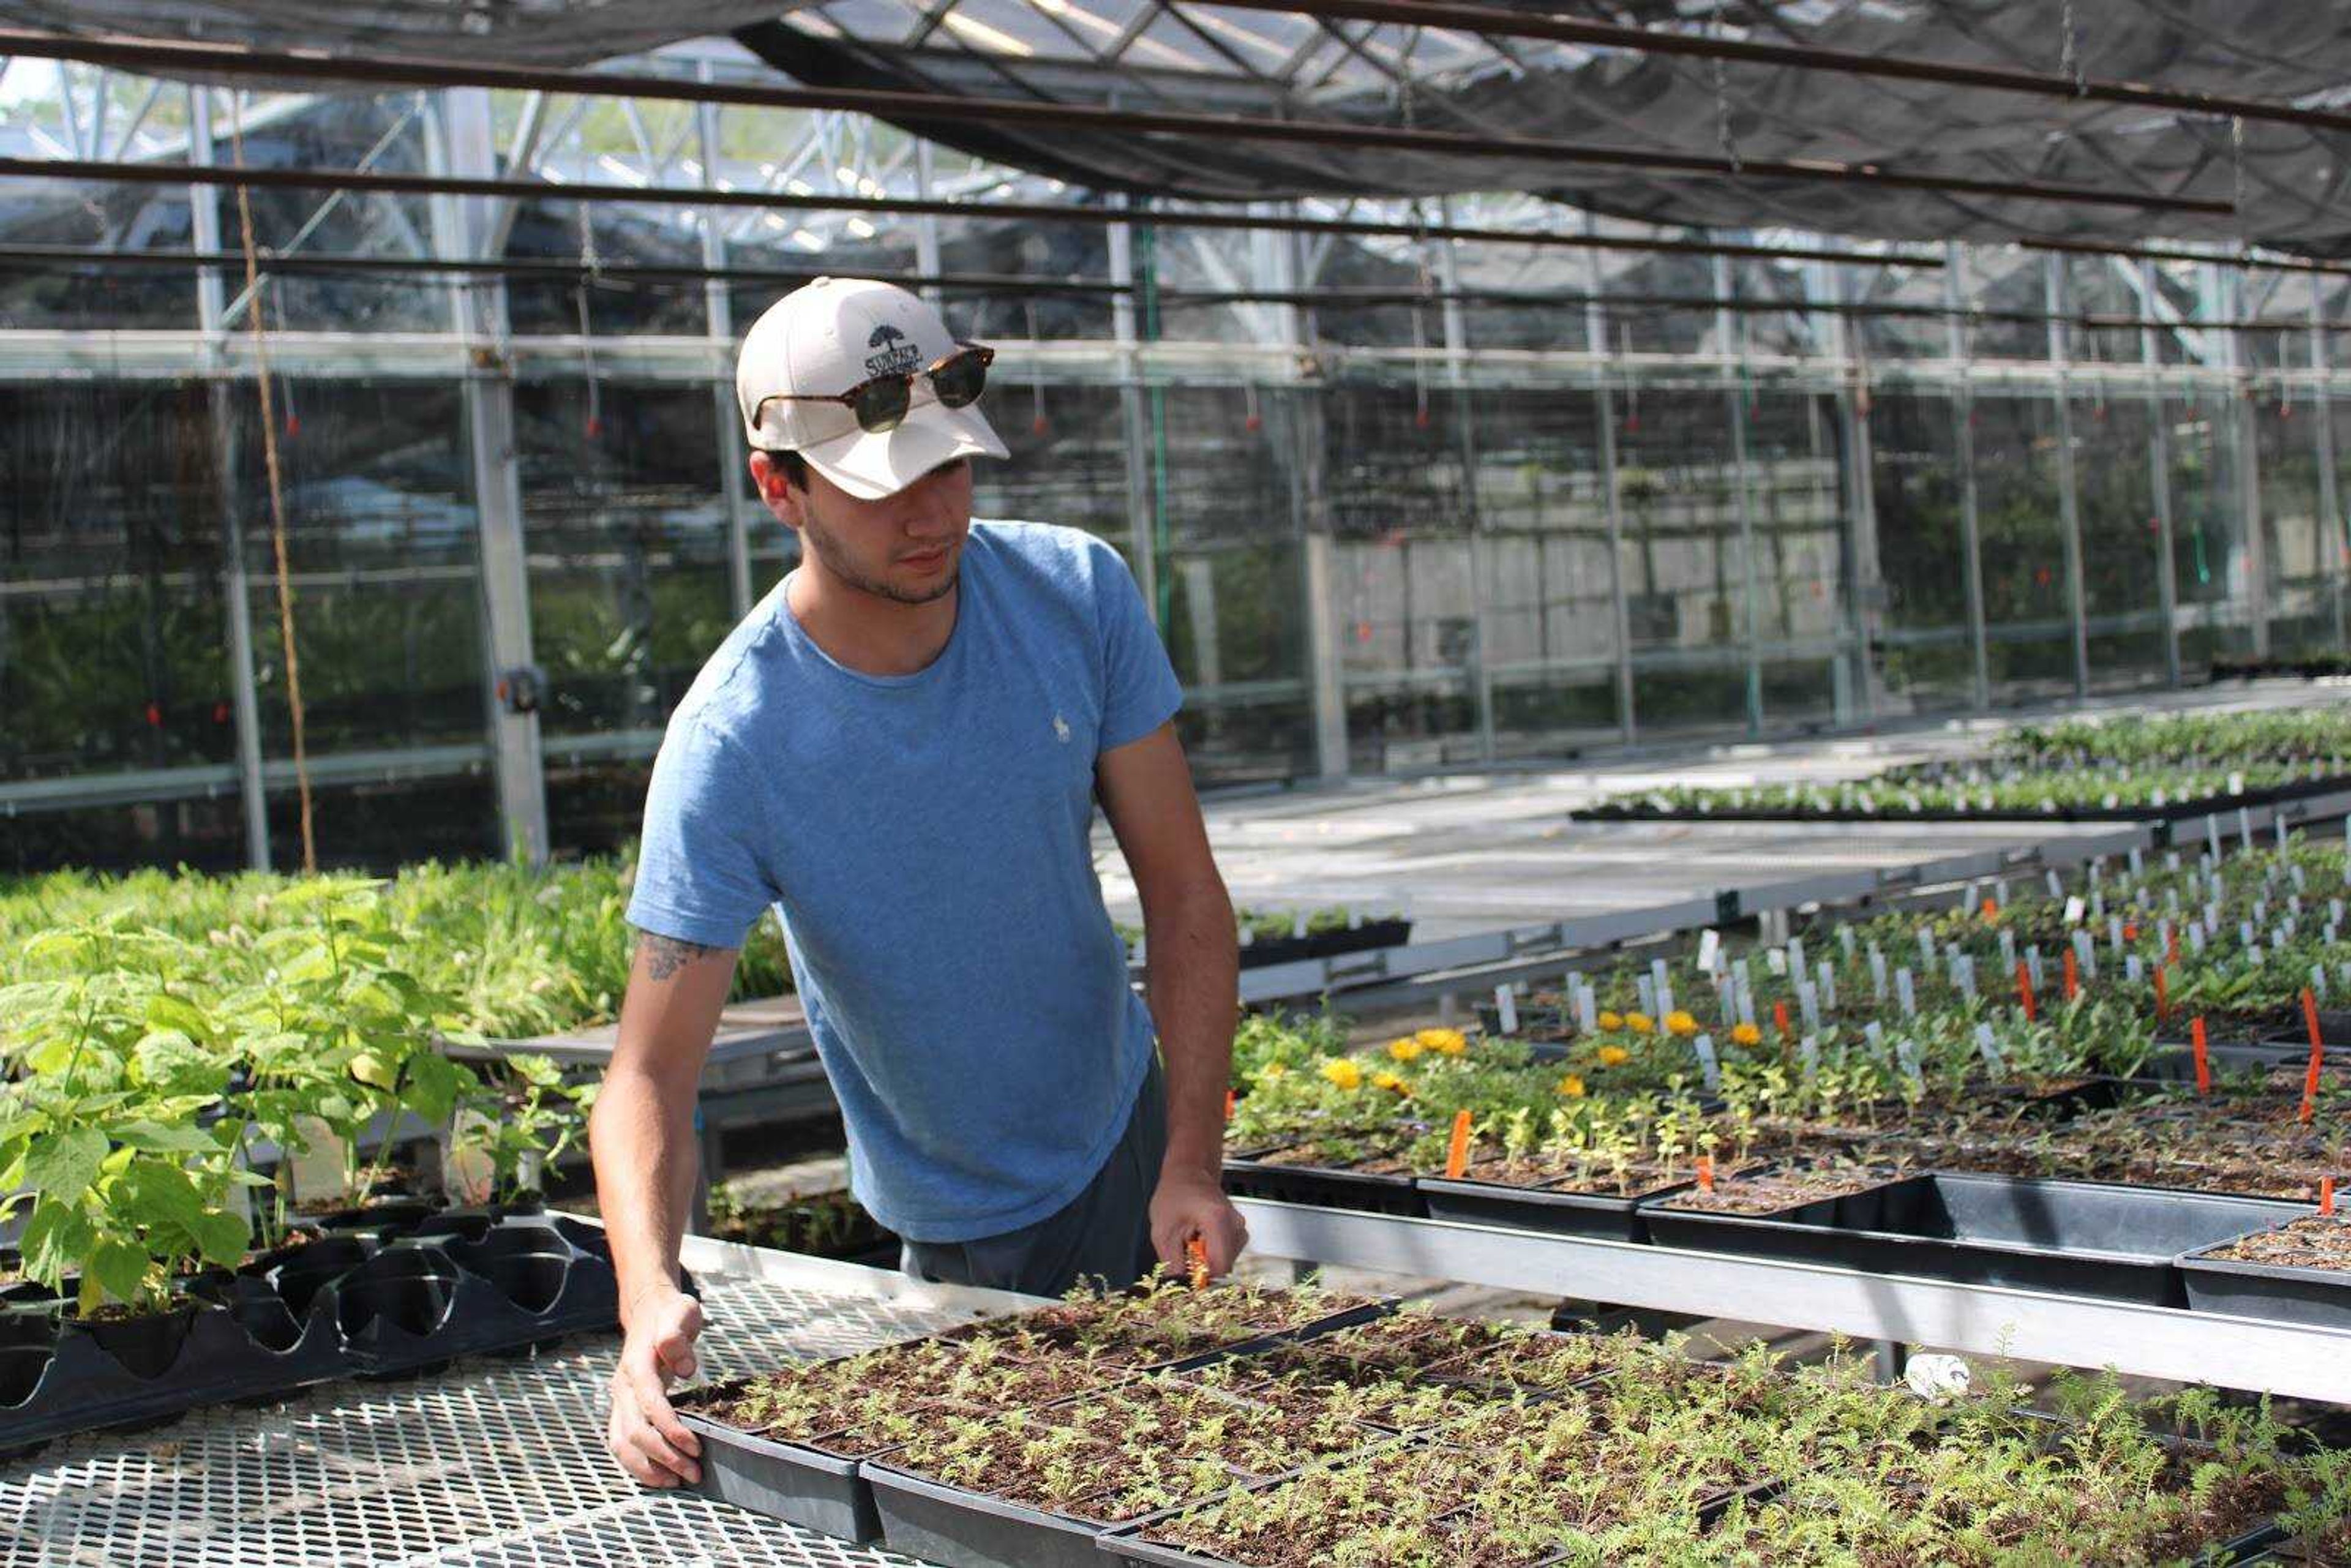 Junior agribusiness horticulture and plant science major Jesse Summers arranges plants for display at the Charles Hutson Horticulture Greenhouse in Cape Girardeau on May 1, 2020.